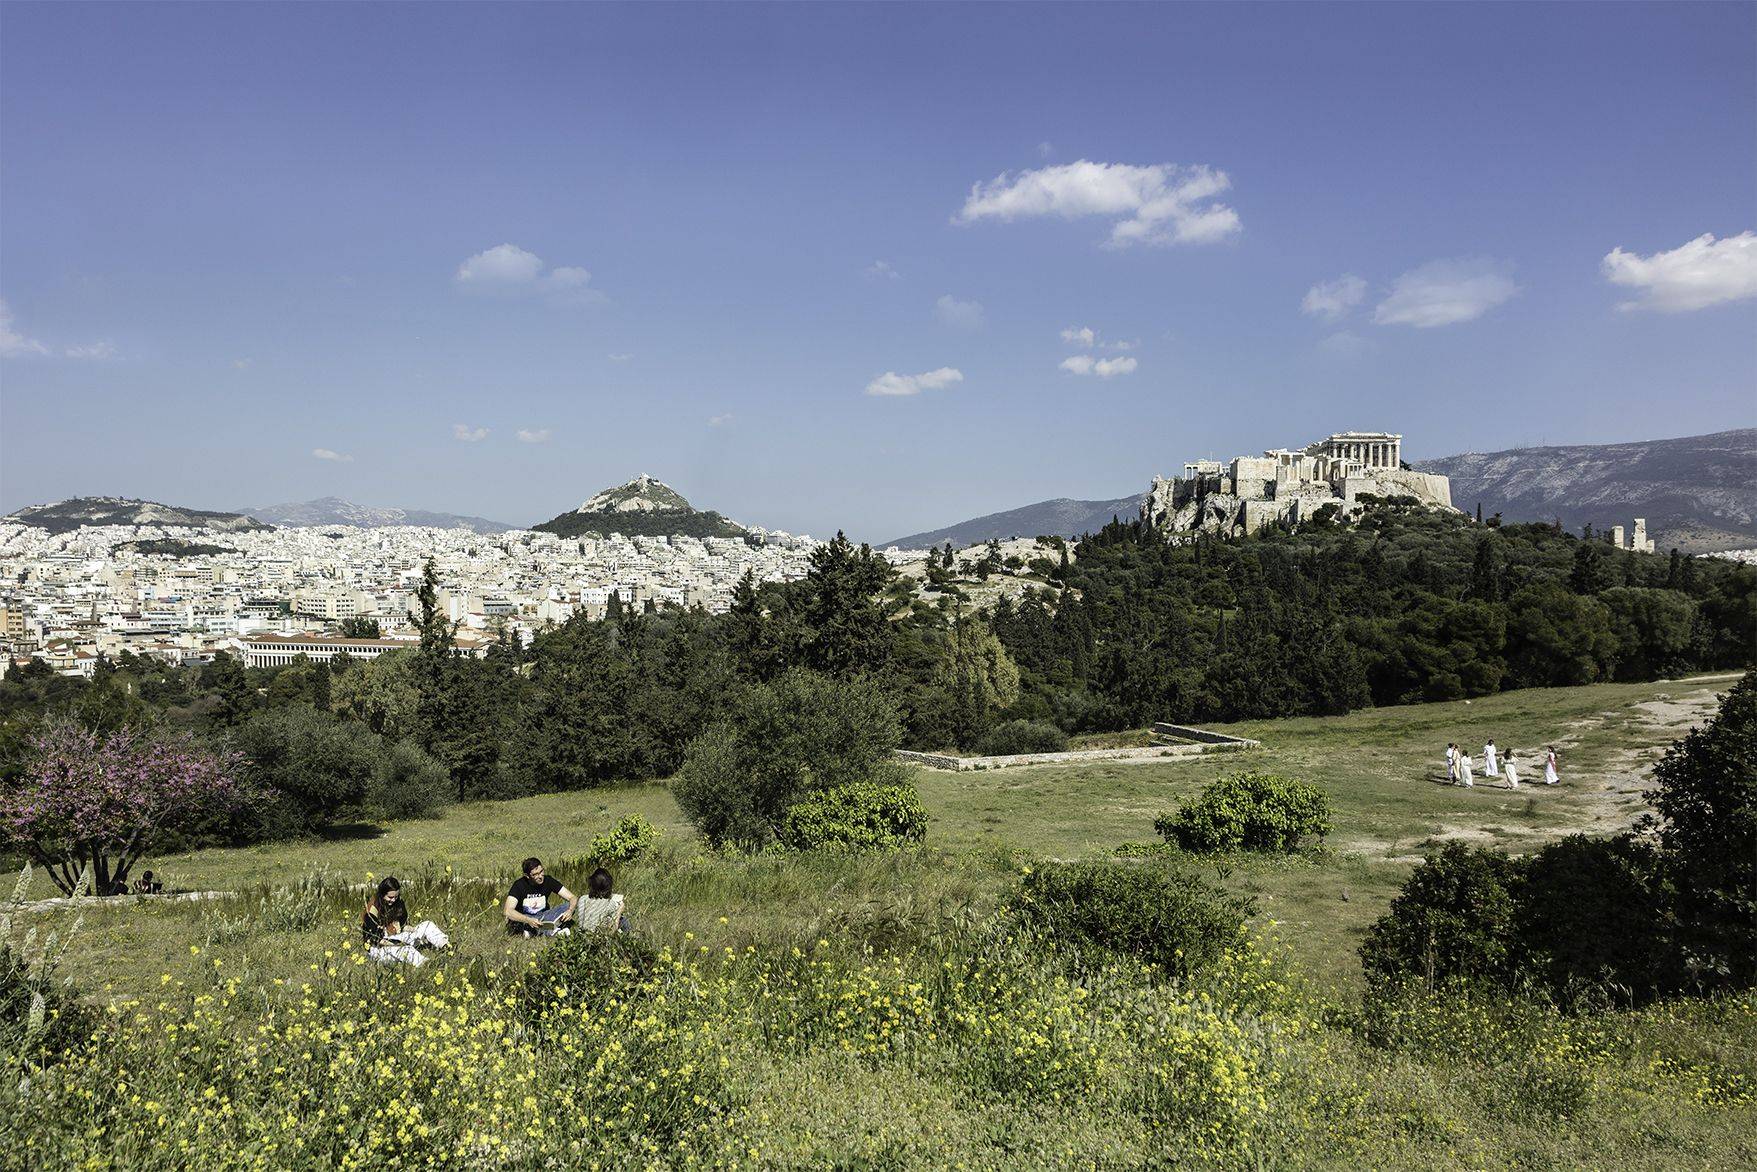 CYA - College Year in Athens 1. CYA Students on the Pnyx. The Acropolis of Athens and Lycabettus hill are visible in the background